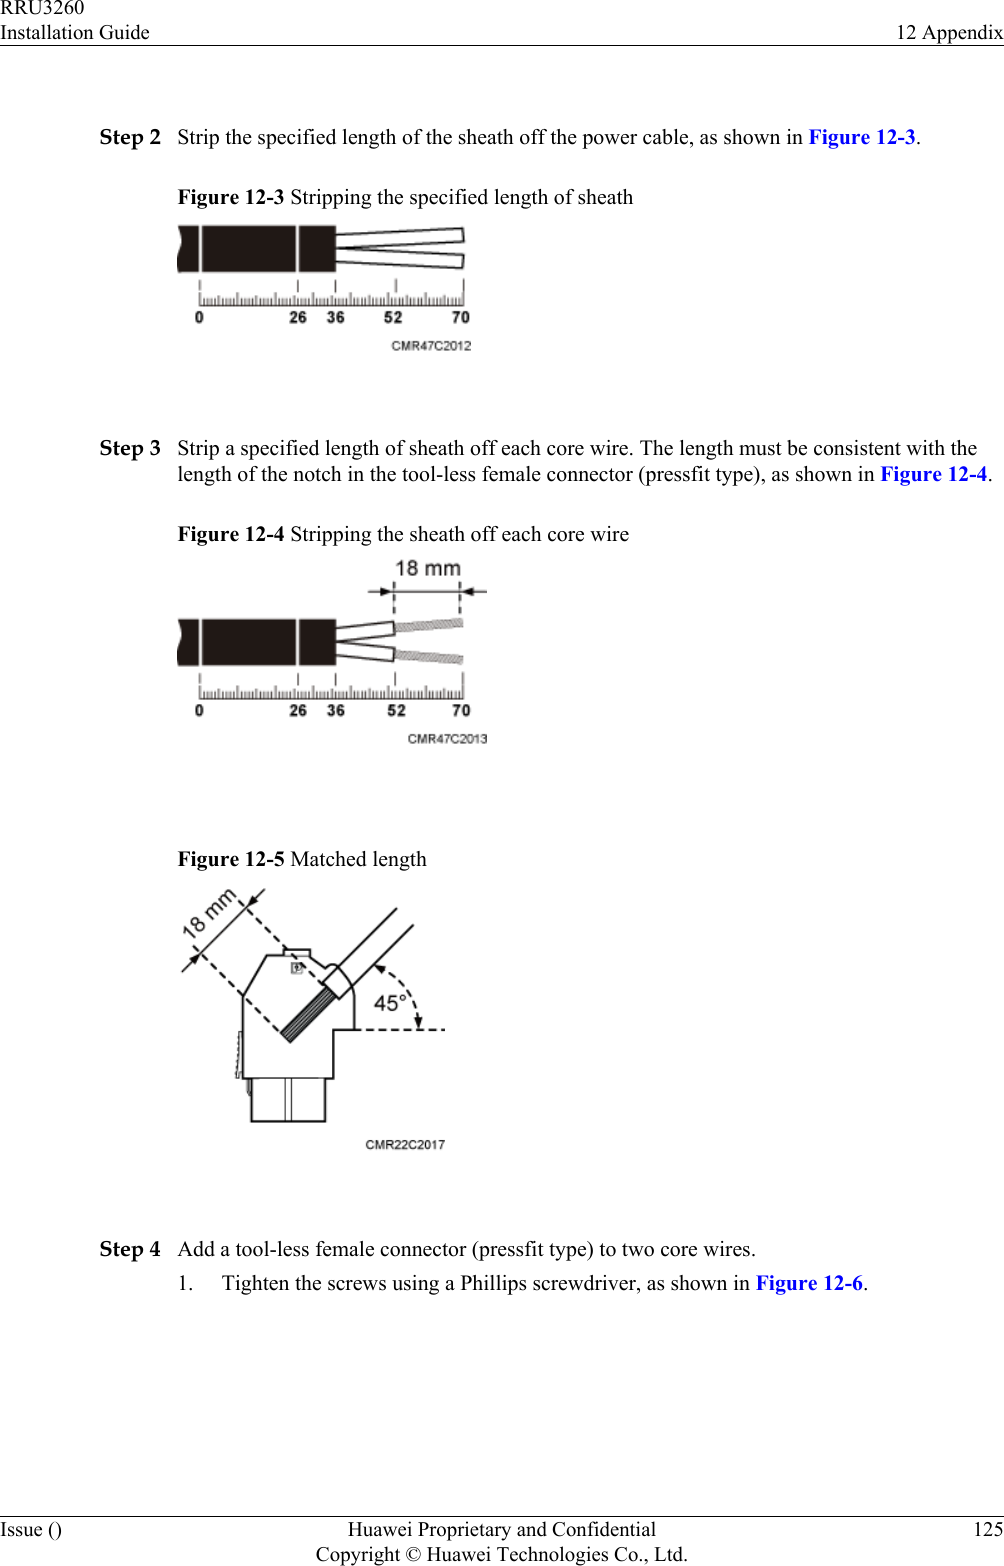  Step 2 Strip the specified length of the sheath off the power cable, as shown in Figure 12-3.Figure 12-3 Stripping the specified length of sheath Step 3 Strip a specified length of sheath off each core wire. The length must be consistent with thelength of the notch in the tool-less female connector (pressfit type), as shown in Figure 12-4.Figure 12-4 Stripping the sheath off each core wire Figure 12-5 Matched length Step 4 Add a tool-less female connector (pressfit type) to two core wires.1. Tighten the screws using a Phillips screwdriver, as shown in Figure 12-6.RRU3260Installation Guide 12 AppendixIssue () Huawei Proprietary and ConfidentialCopyright © Huawei Technologies Co., Ltd.125